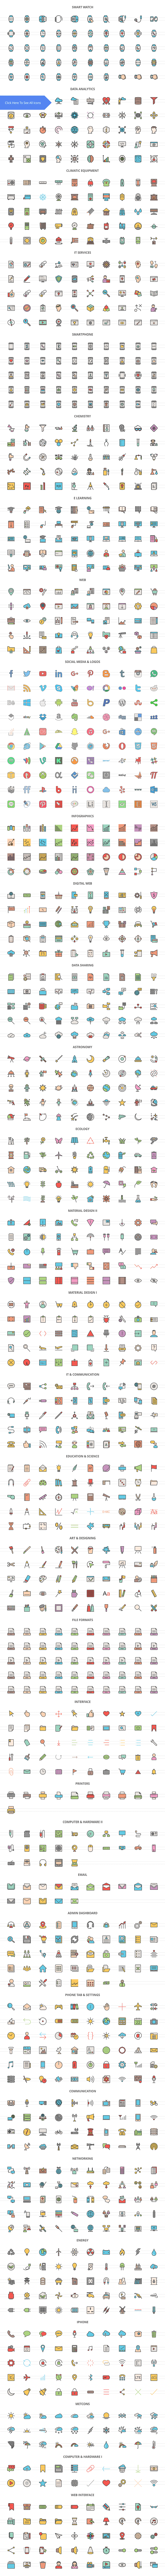 1440 Science Filled Line Icons in Icons - product preview 1